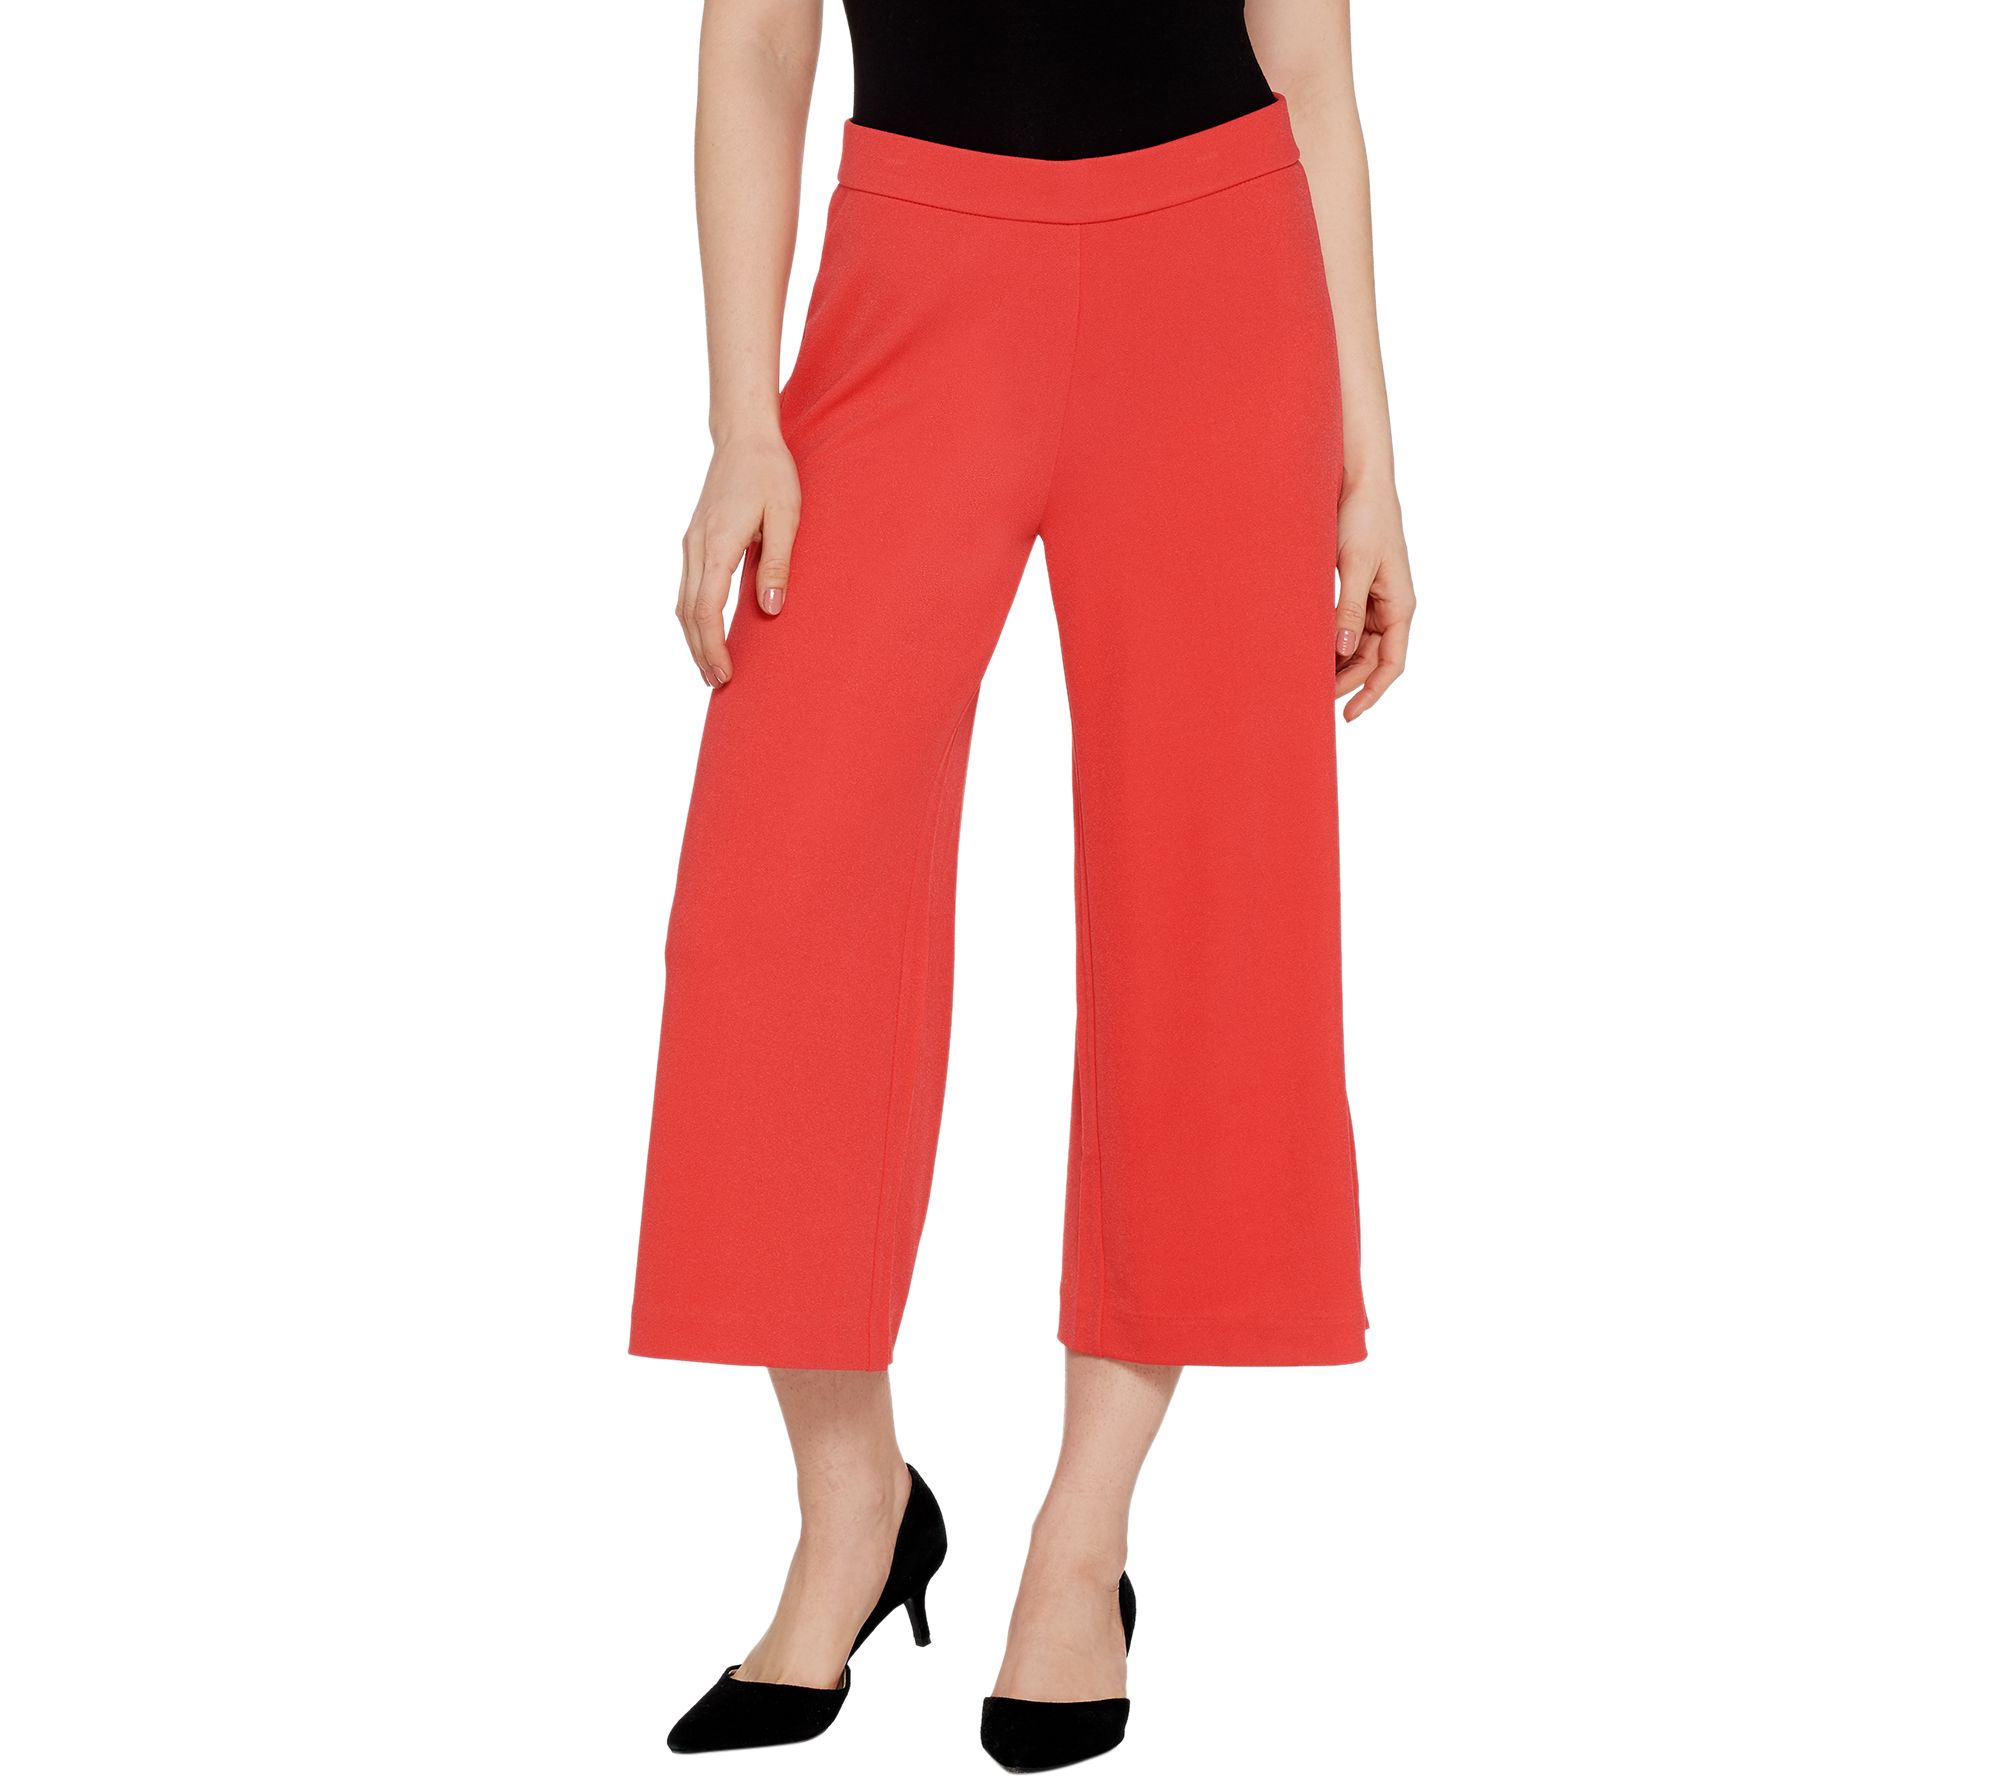 Knitted culotte, red, Pants Women's